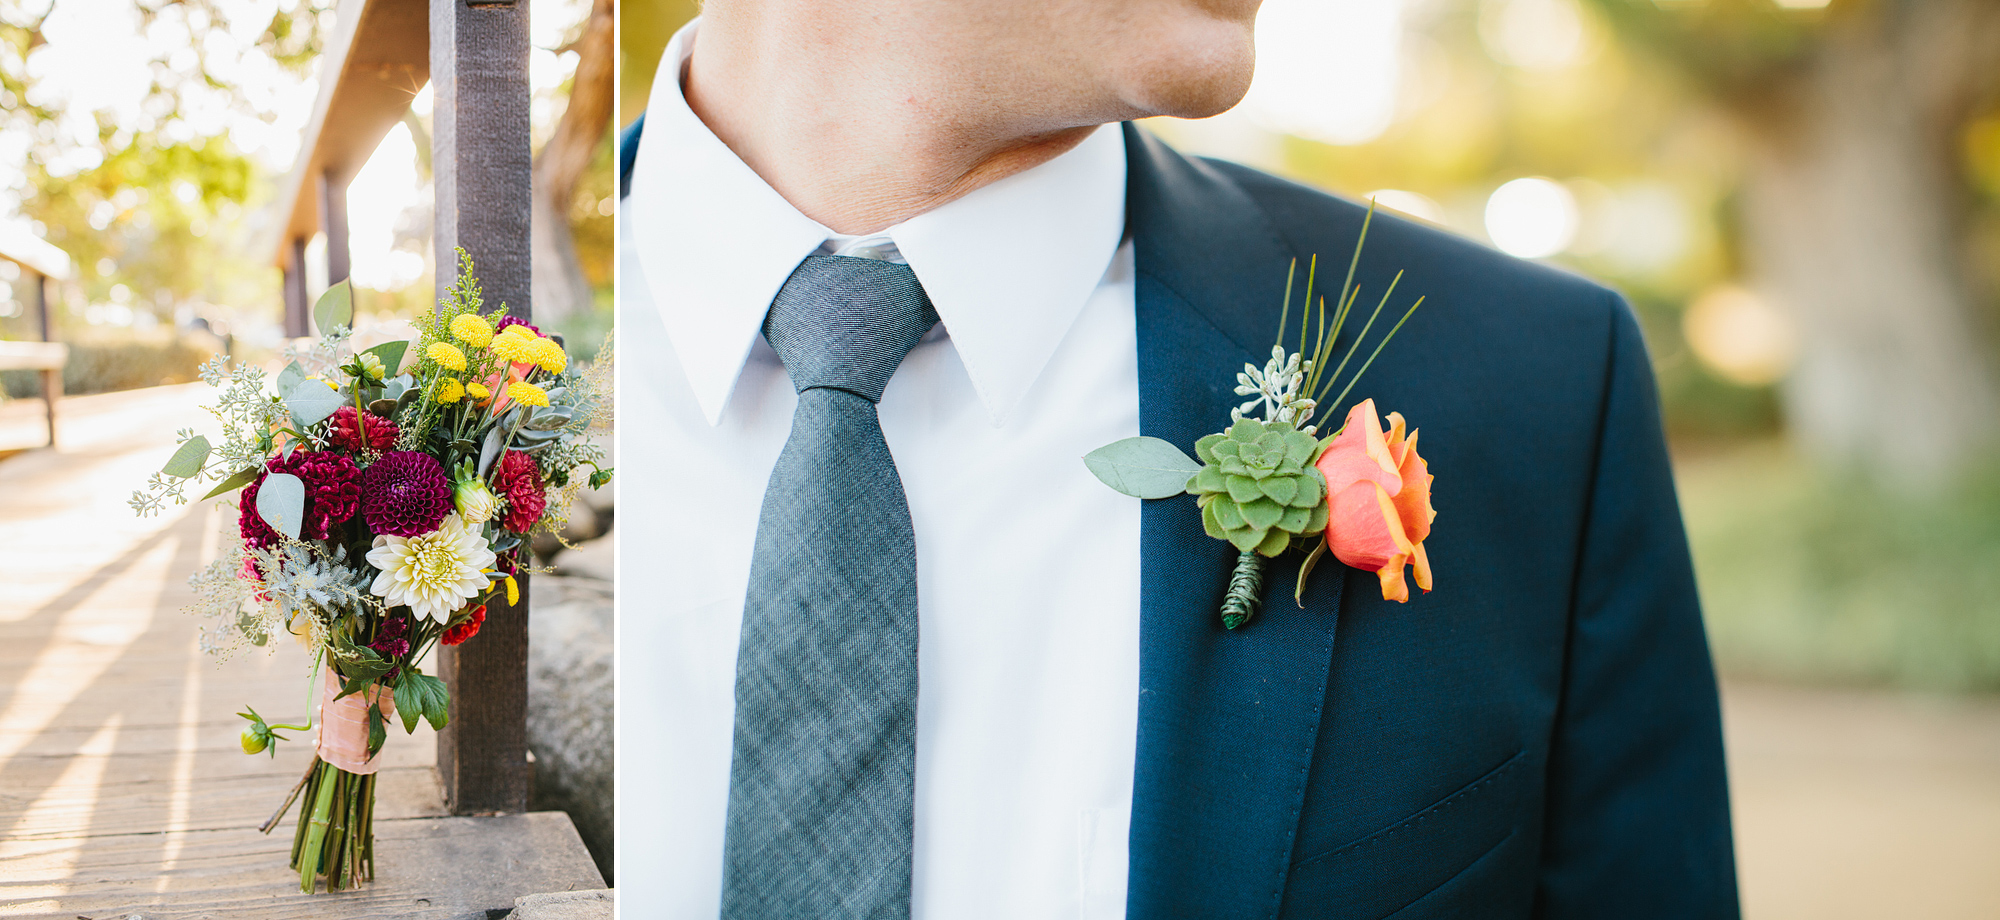 The bride's bouquet and groom's boutonniere. 